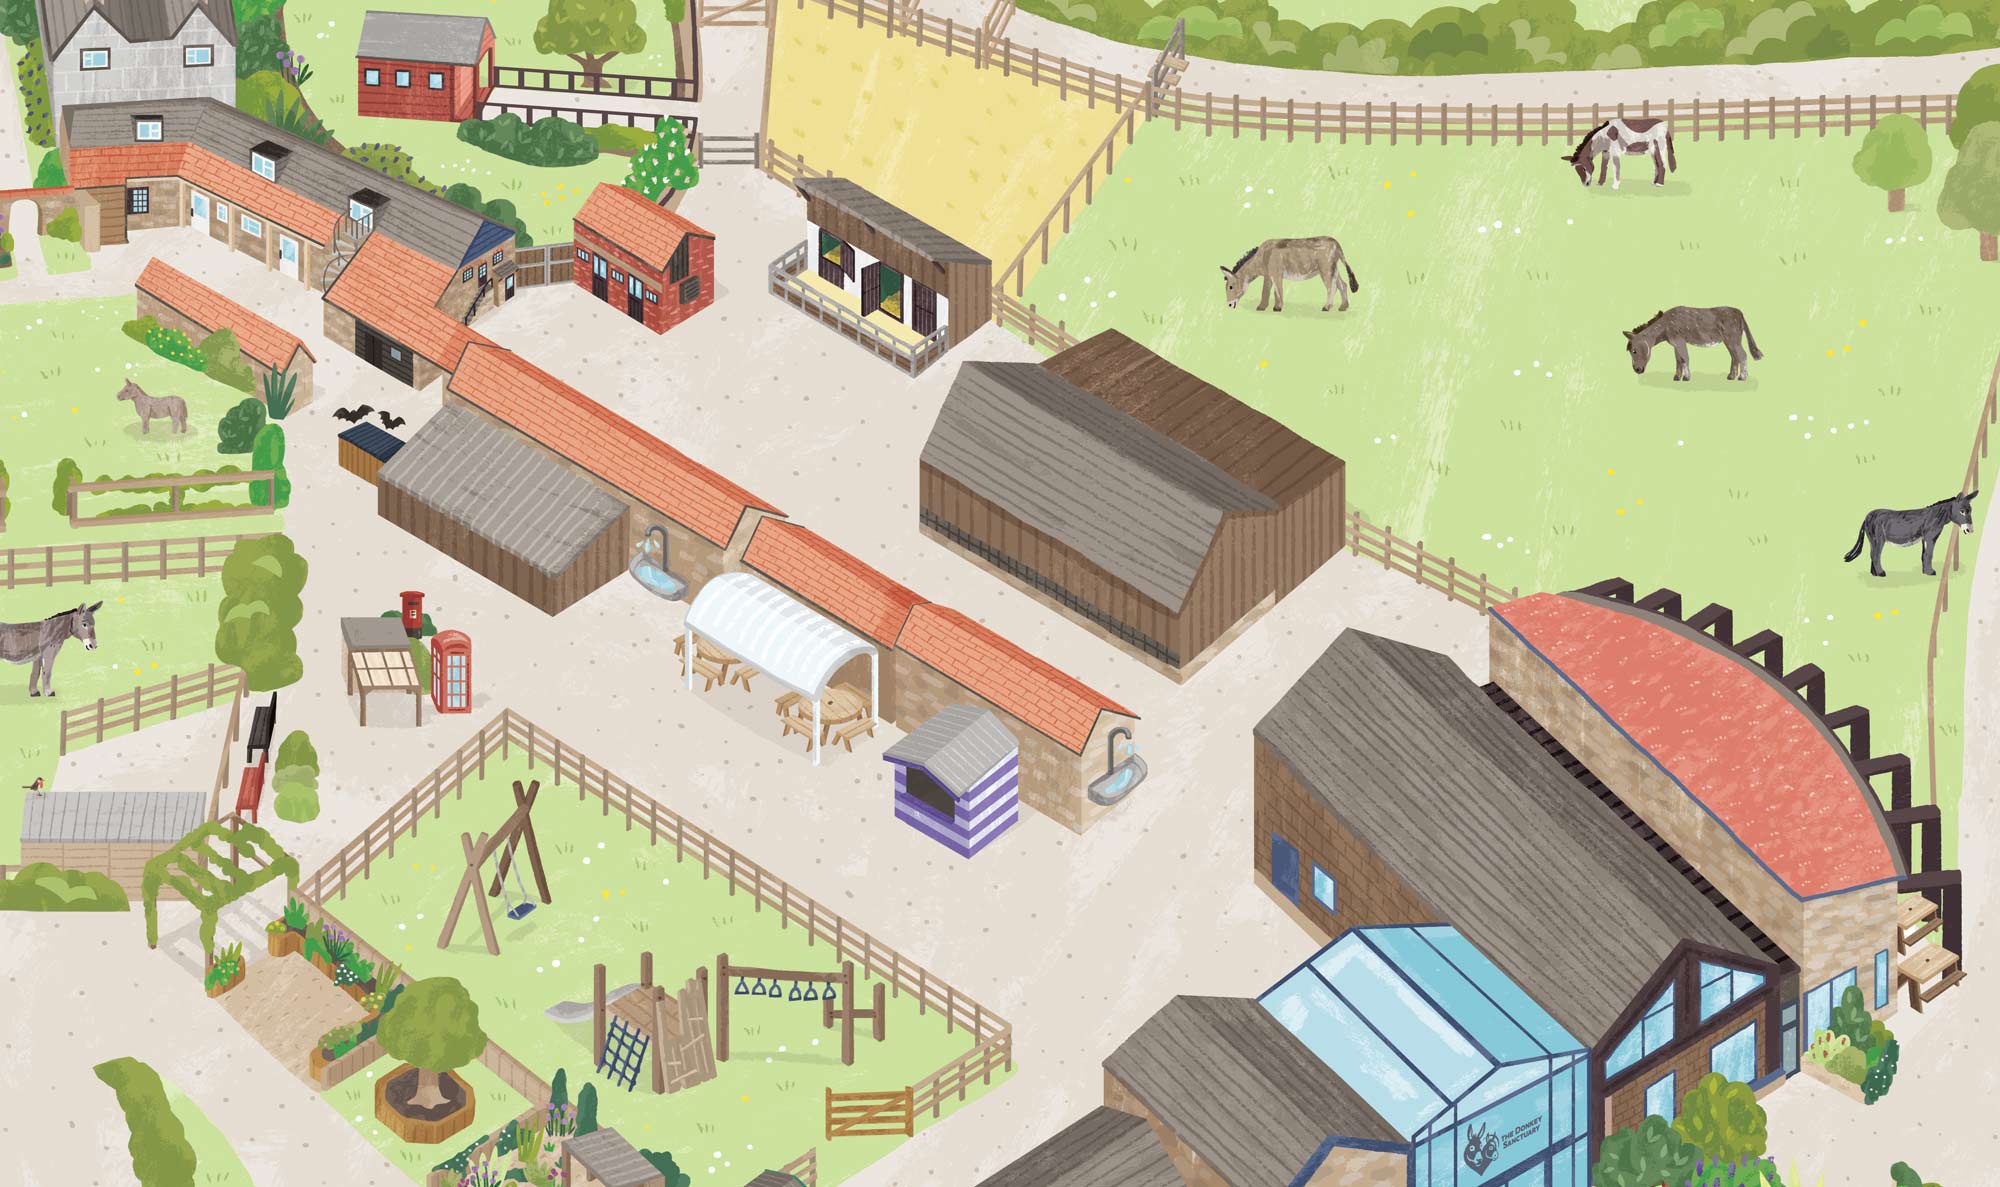 Close up of the Donkey Sanctuary illustrated map by Elly Jahnz